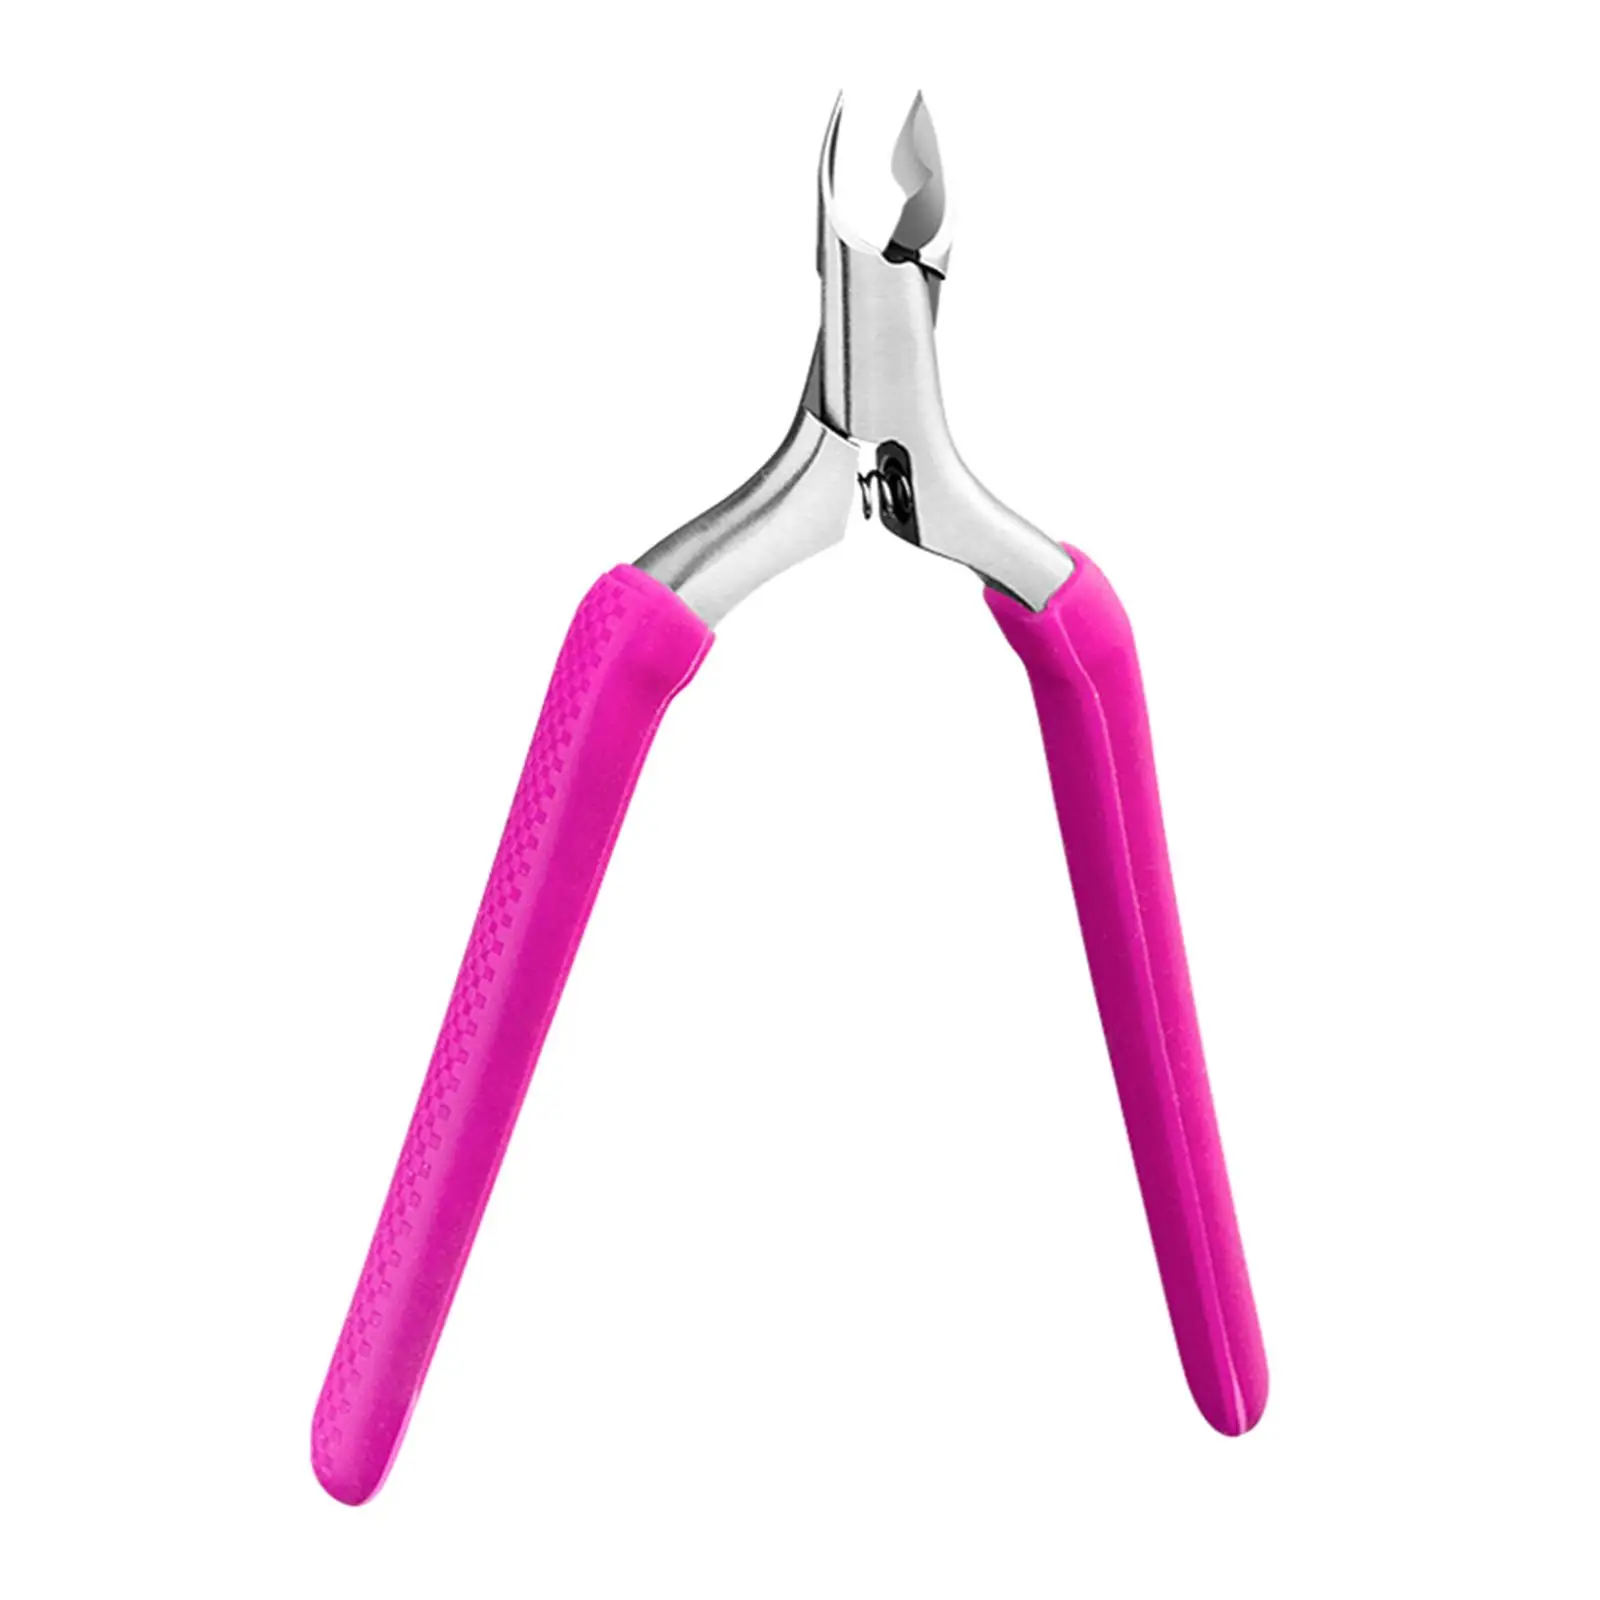 Professional Cuticle Nippers Anti Slip Silicone Handle for Fingernails and Toenails Stainless Steel Cuticle Trimmer for Salon